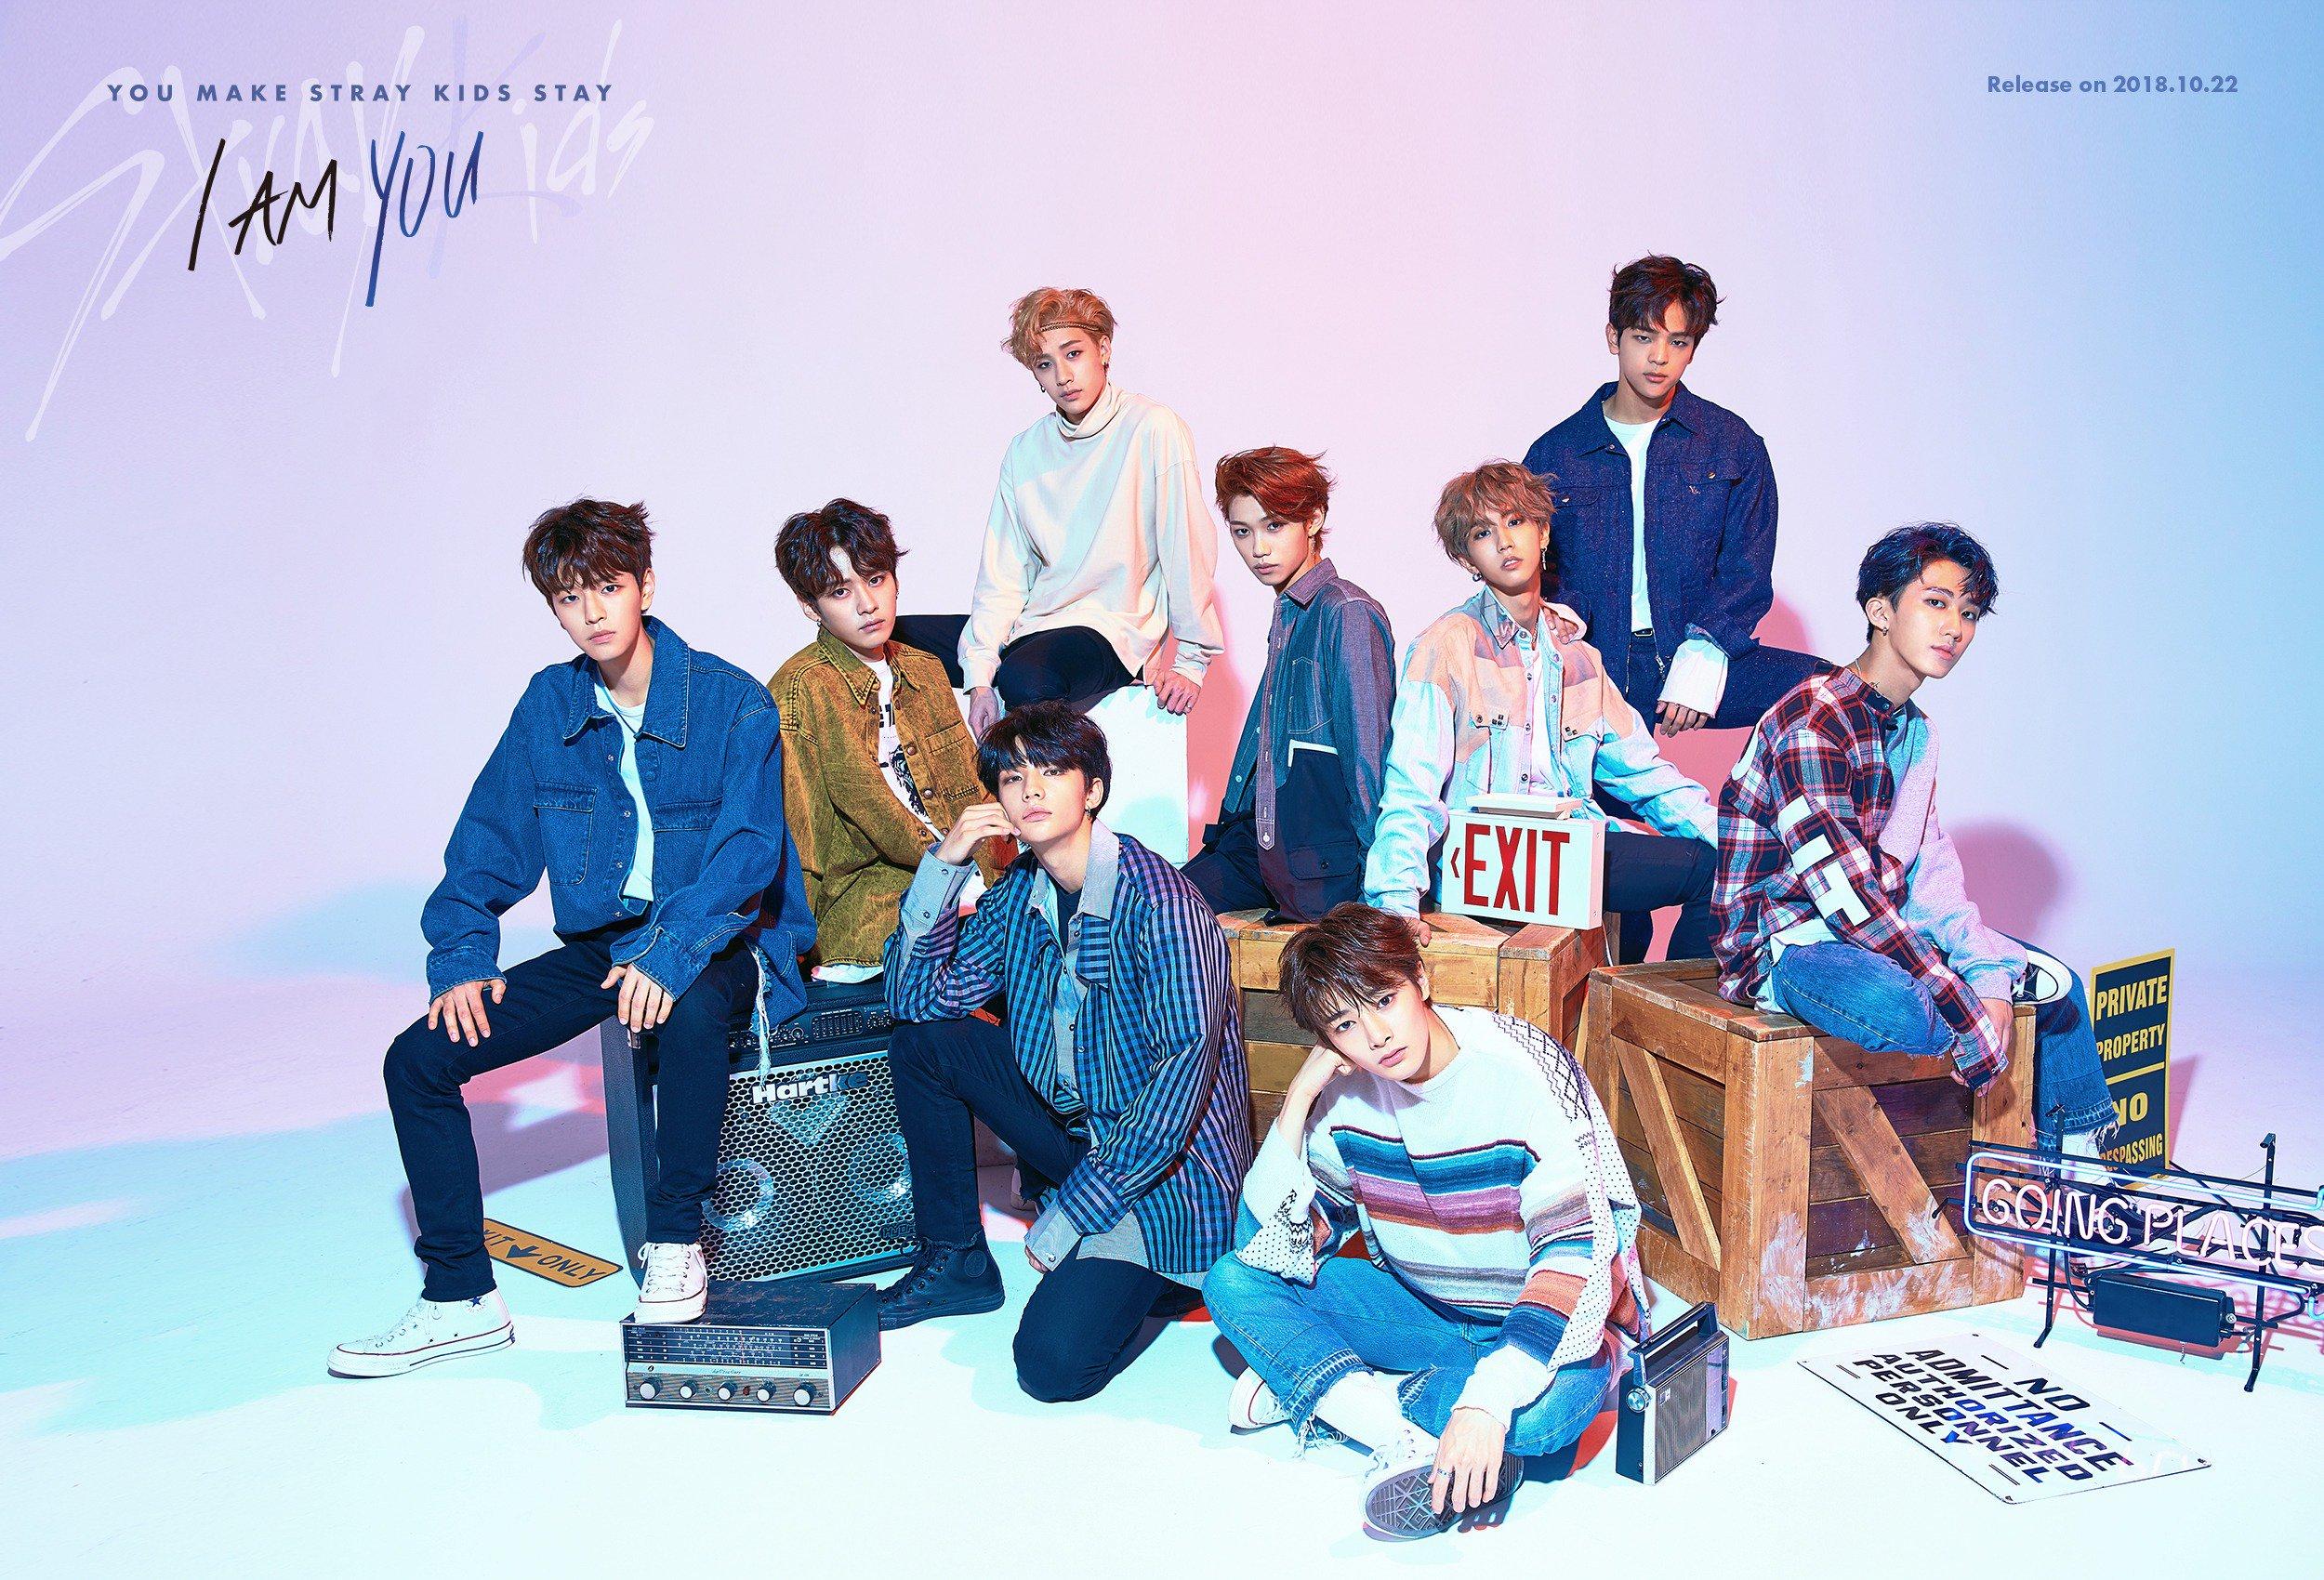 Stray Kids am YOU (Group Teaser Image )